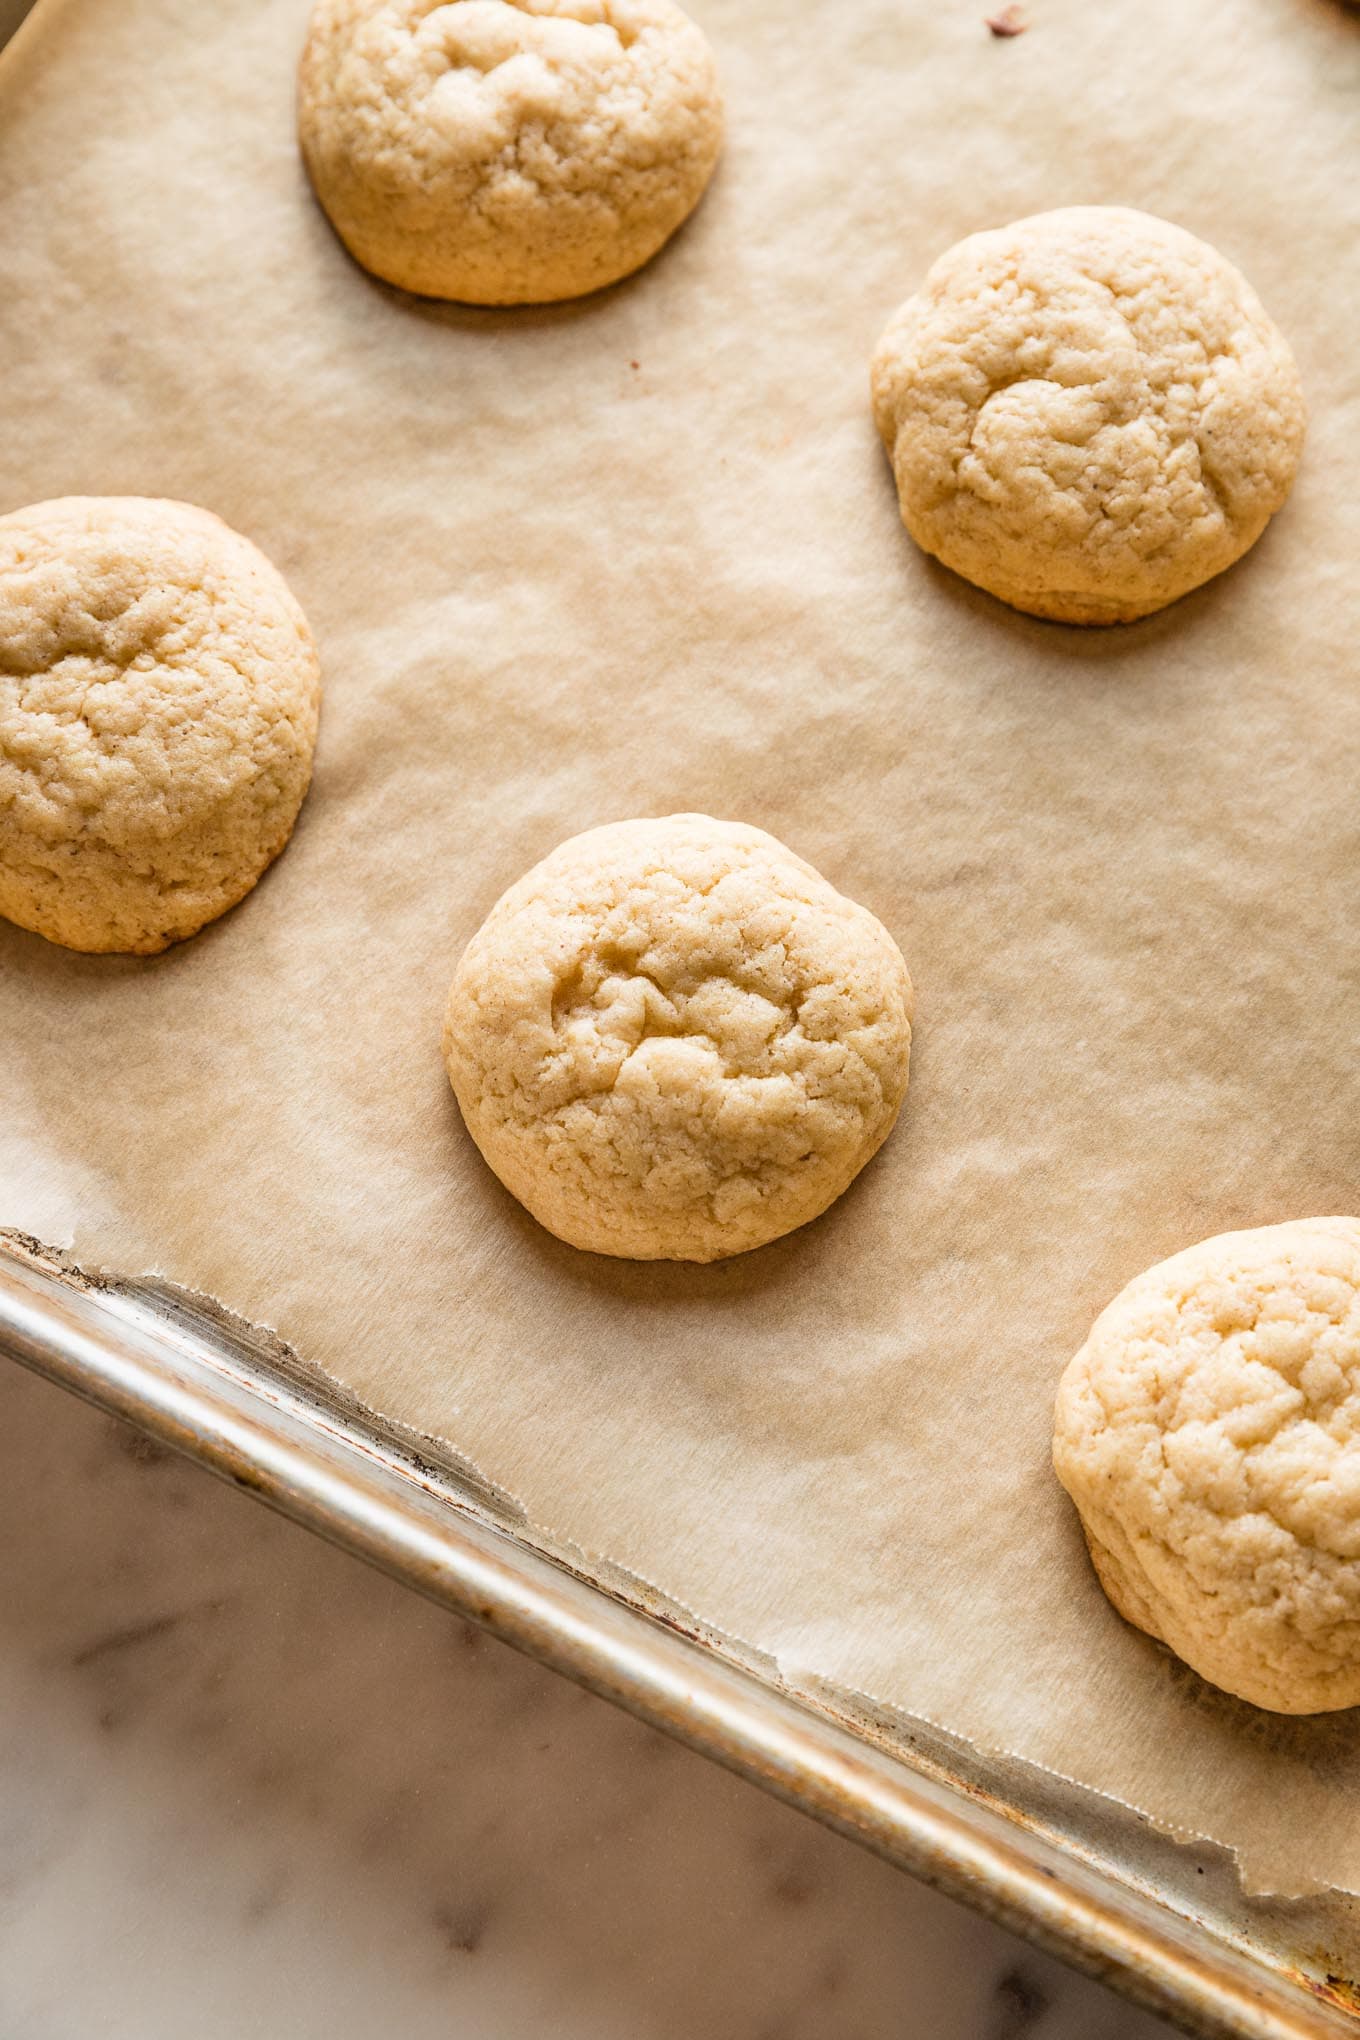 Just-baked eggnog sugar cookies cooling on a parchment paper-lined baking sheet.